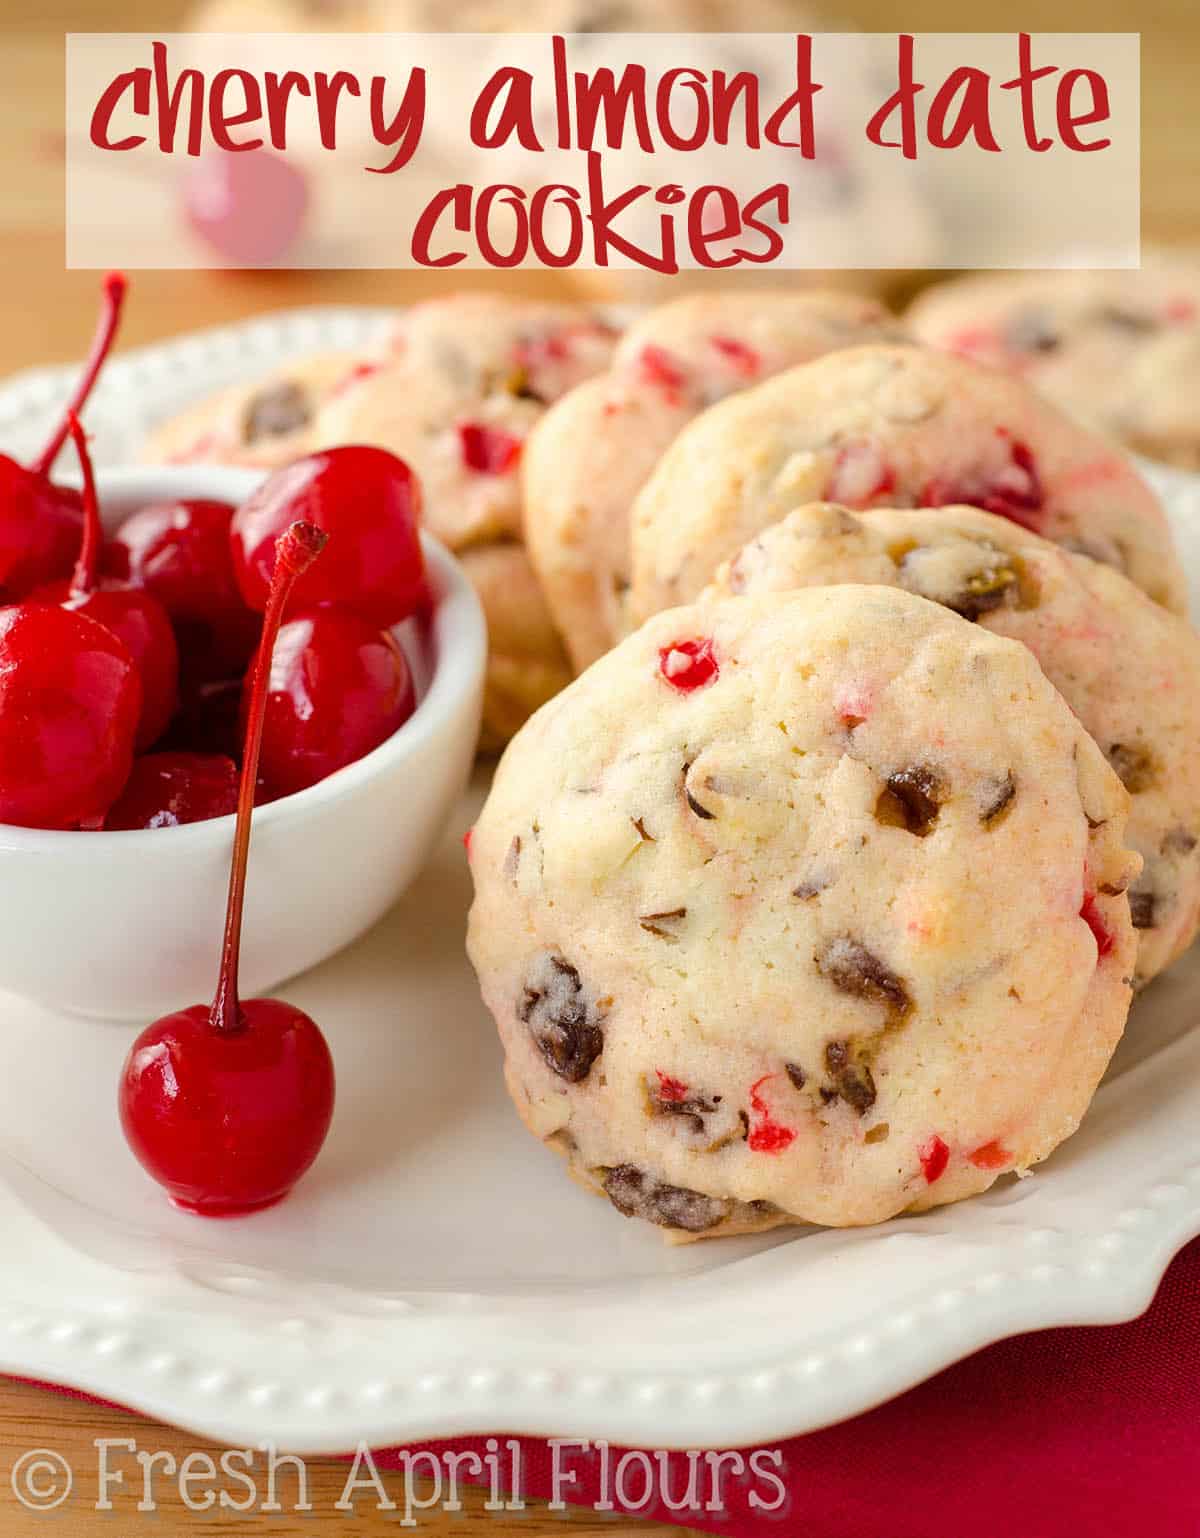 Cherry Almond Date Cookies: Soft-centered cookies filled with crunchy slivered almonds, sweet maraschino cherries, and chewy, flavorful dates. Perfect for your cookie jar any time of the year! via @frshaprilflours